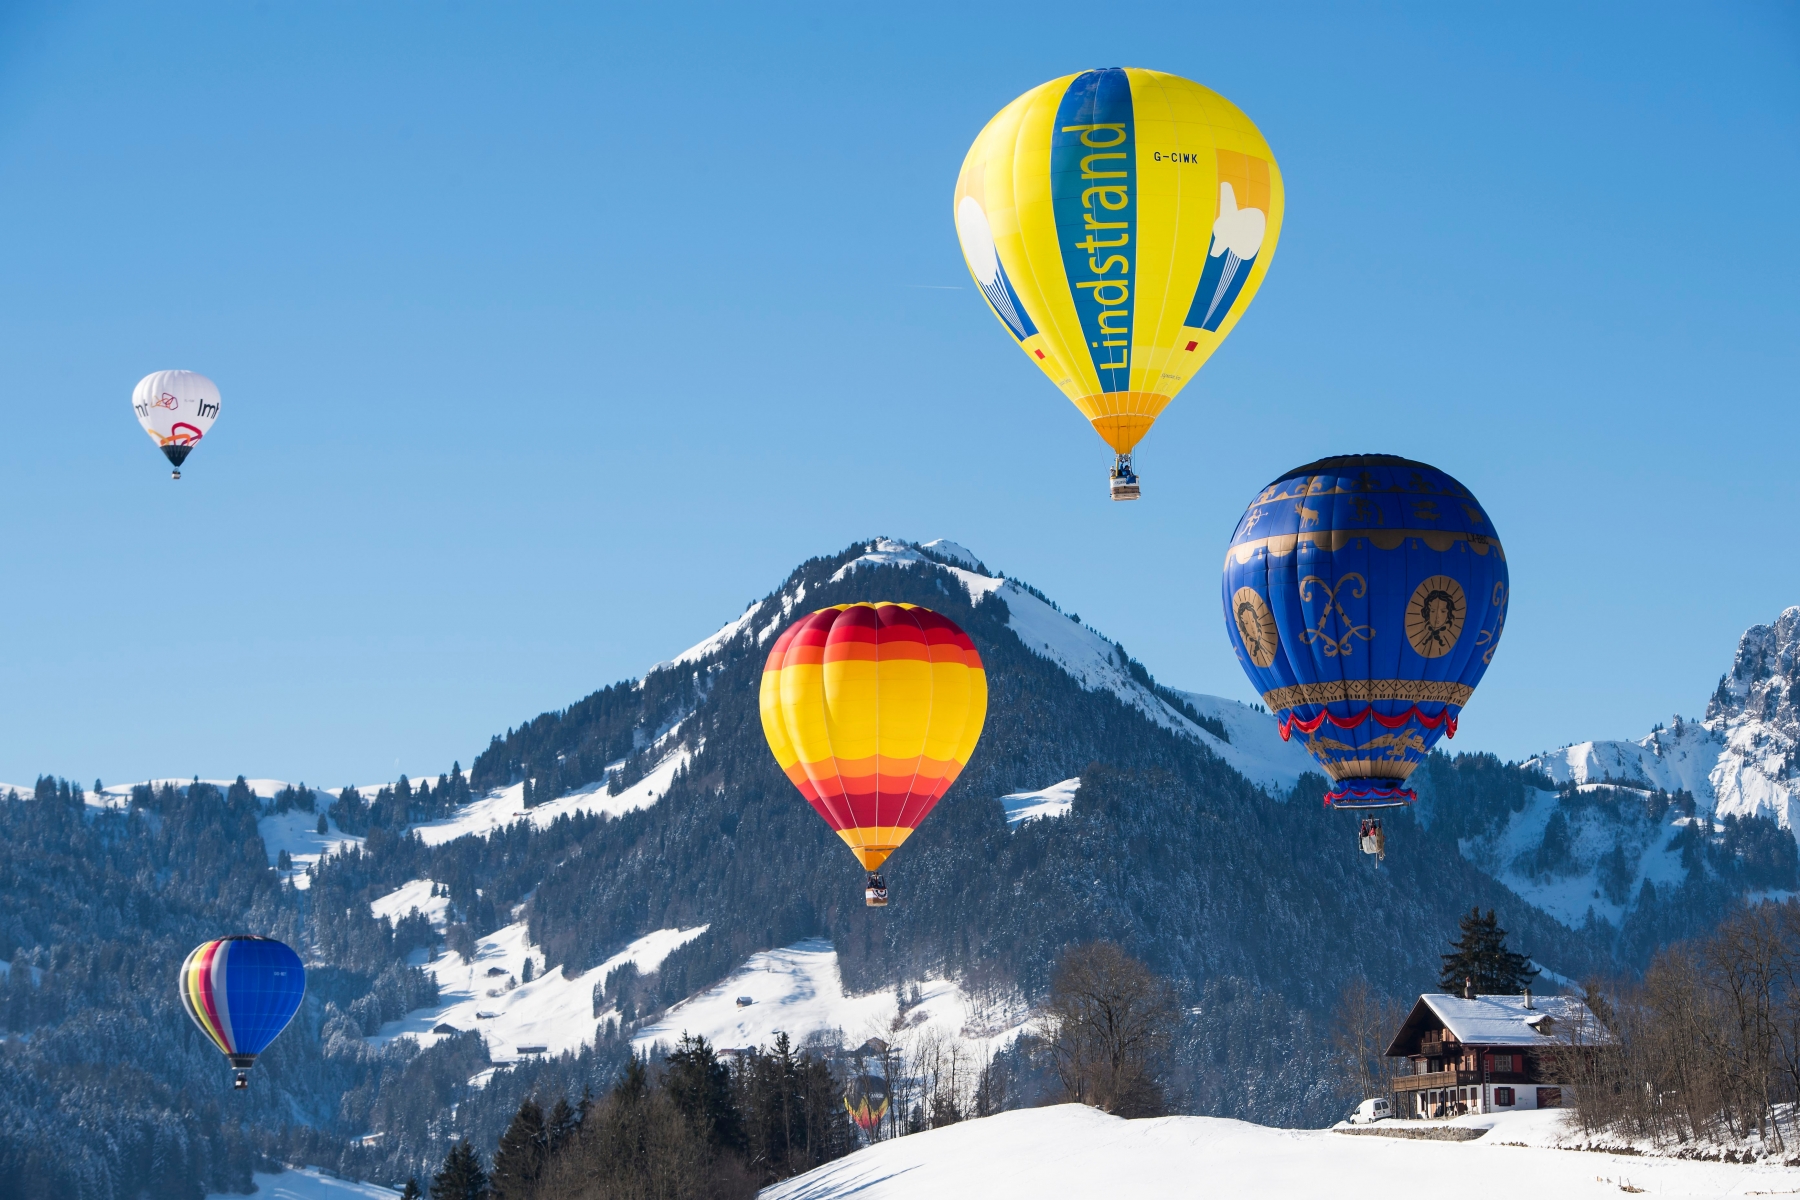 Hot air balloons fly during the 39th International Hot Air Balloon Week in Chateau-d'Oex, Switzerland, Saturday, January 21, 2017. More than 50 balloons and 70 pilots from 15 countries take part in the event between 21 and 29 January in the Swiss mountain resort. (KEYSTONE/Jean-Christophe Bott) SWITZERLAND HOT AIR BALLOONS FESTIVAL